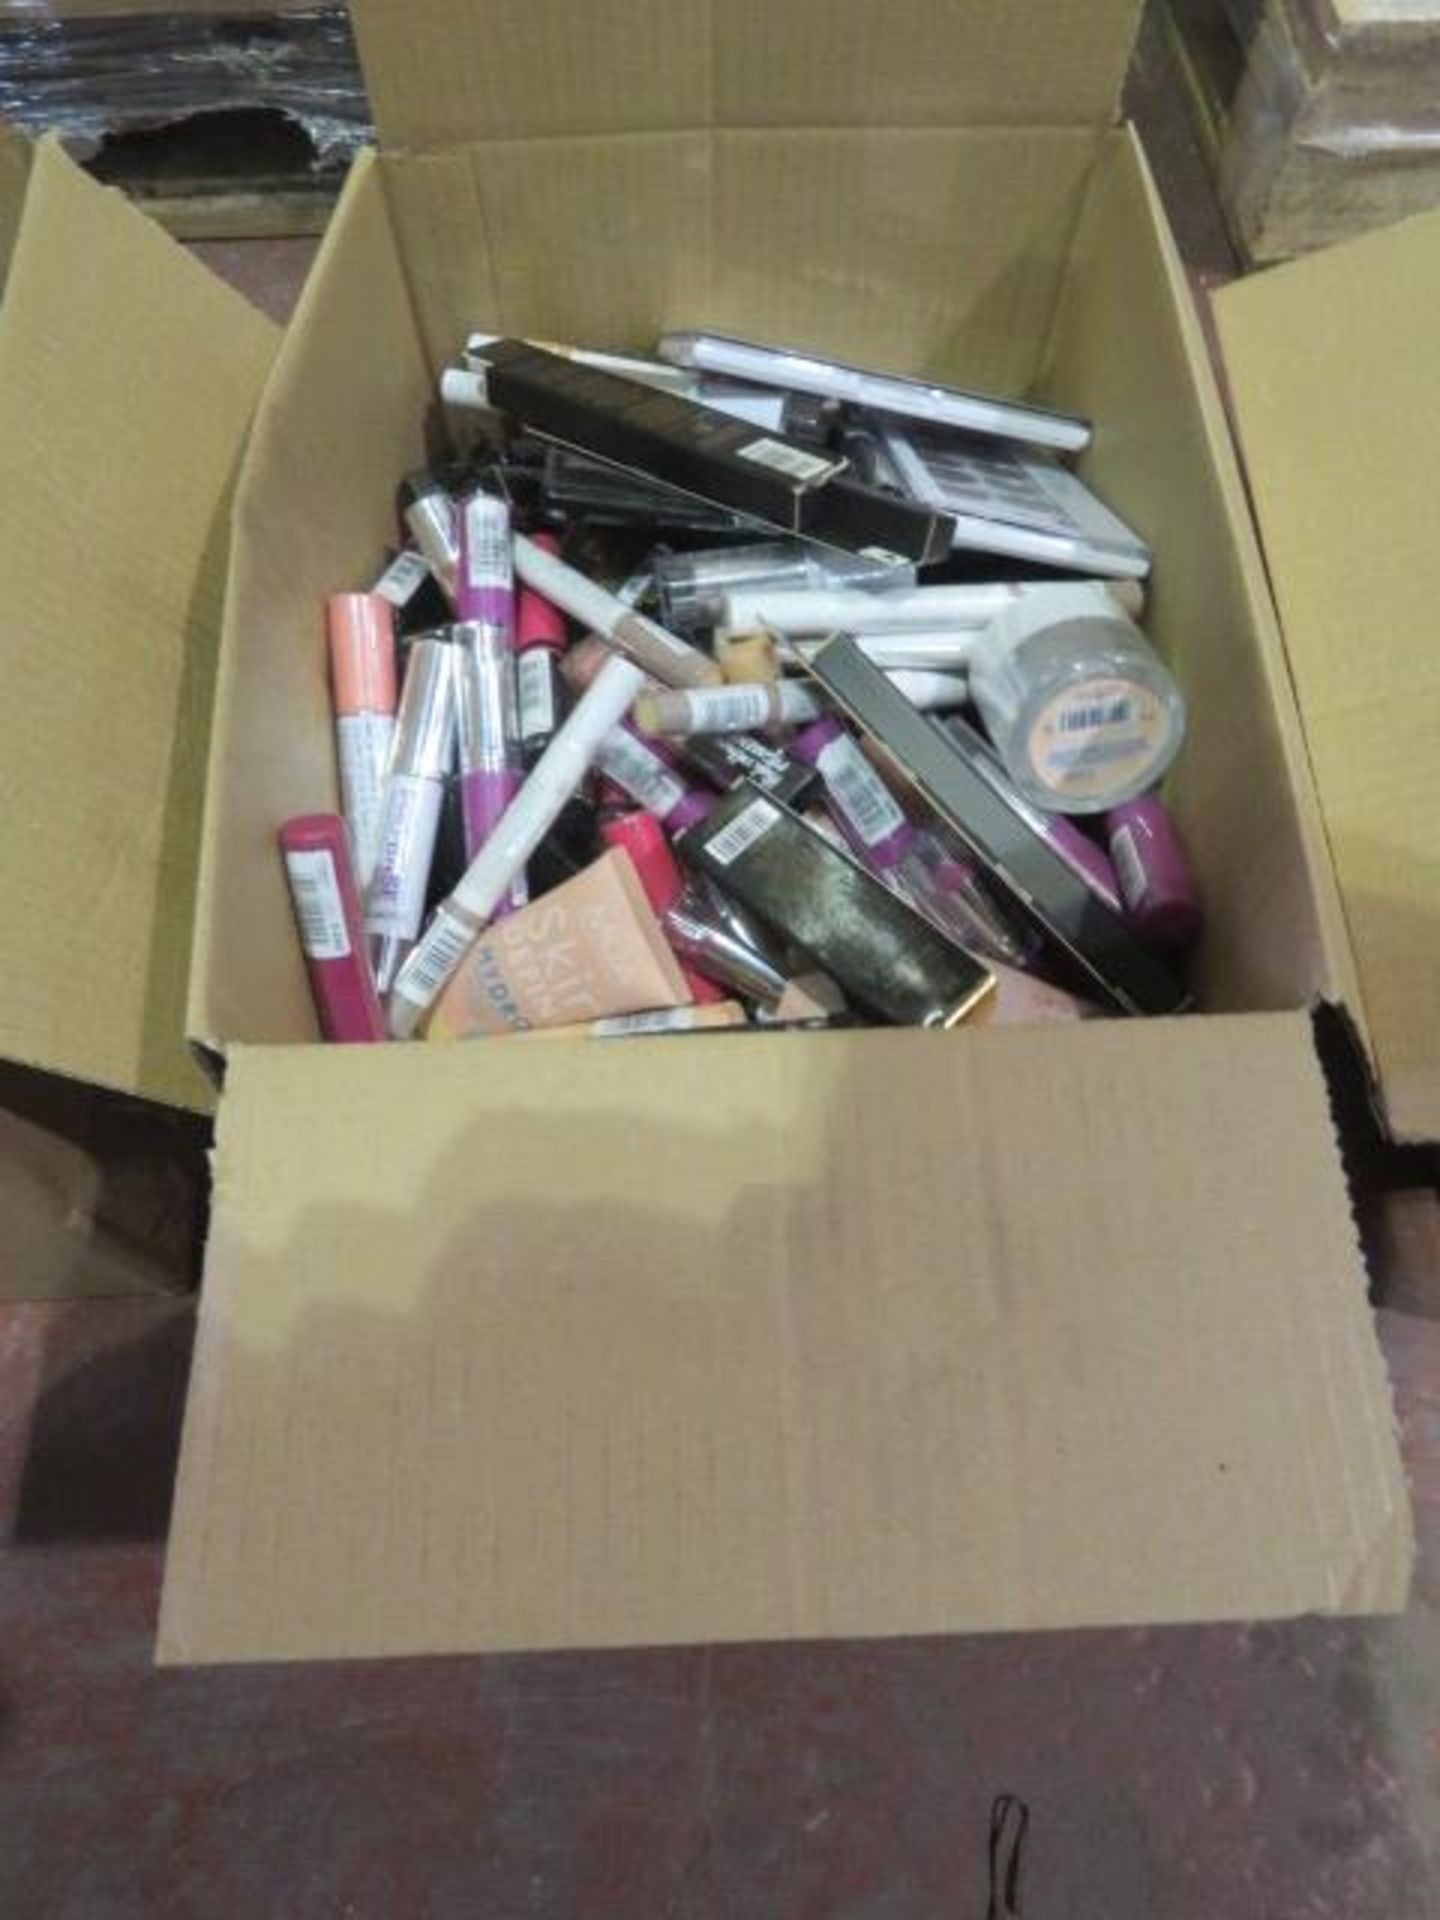 Circa. 200 items of various new make up acadamy make up to include: skin define hydro foundation, - Image 2 of 2